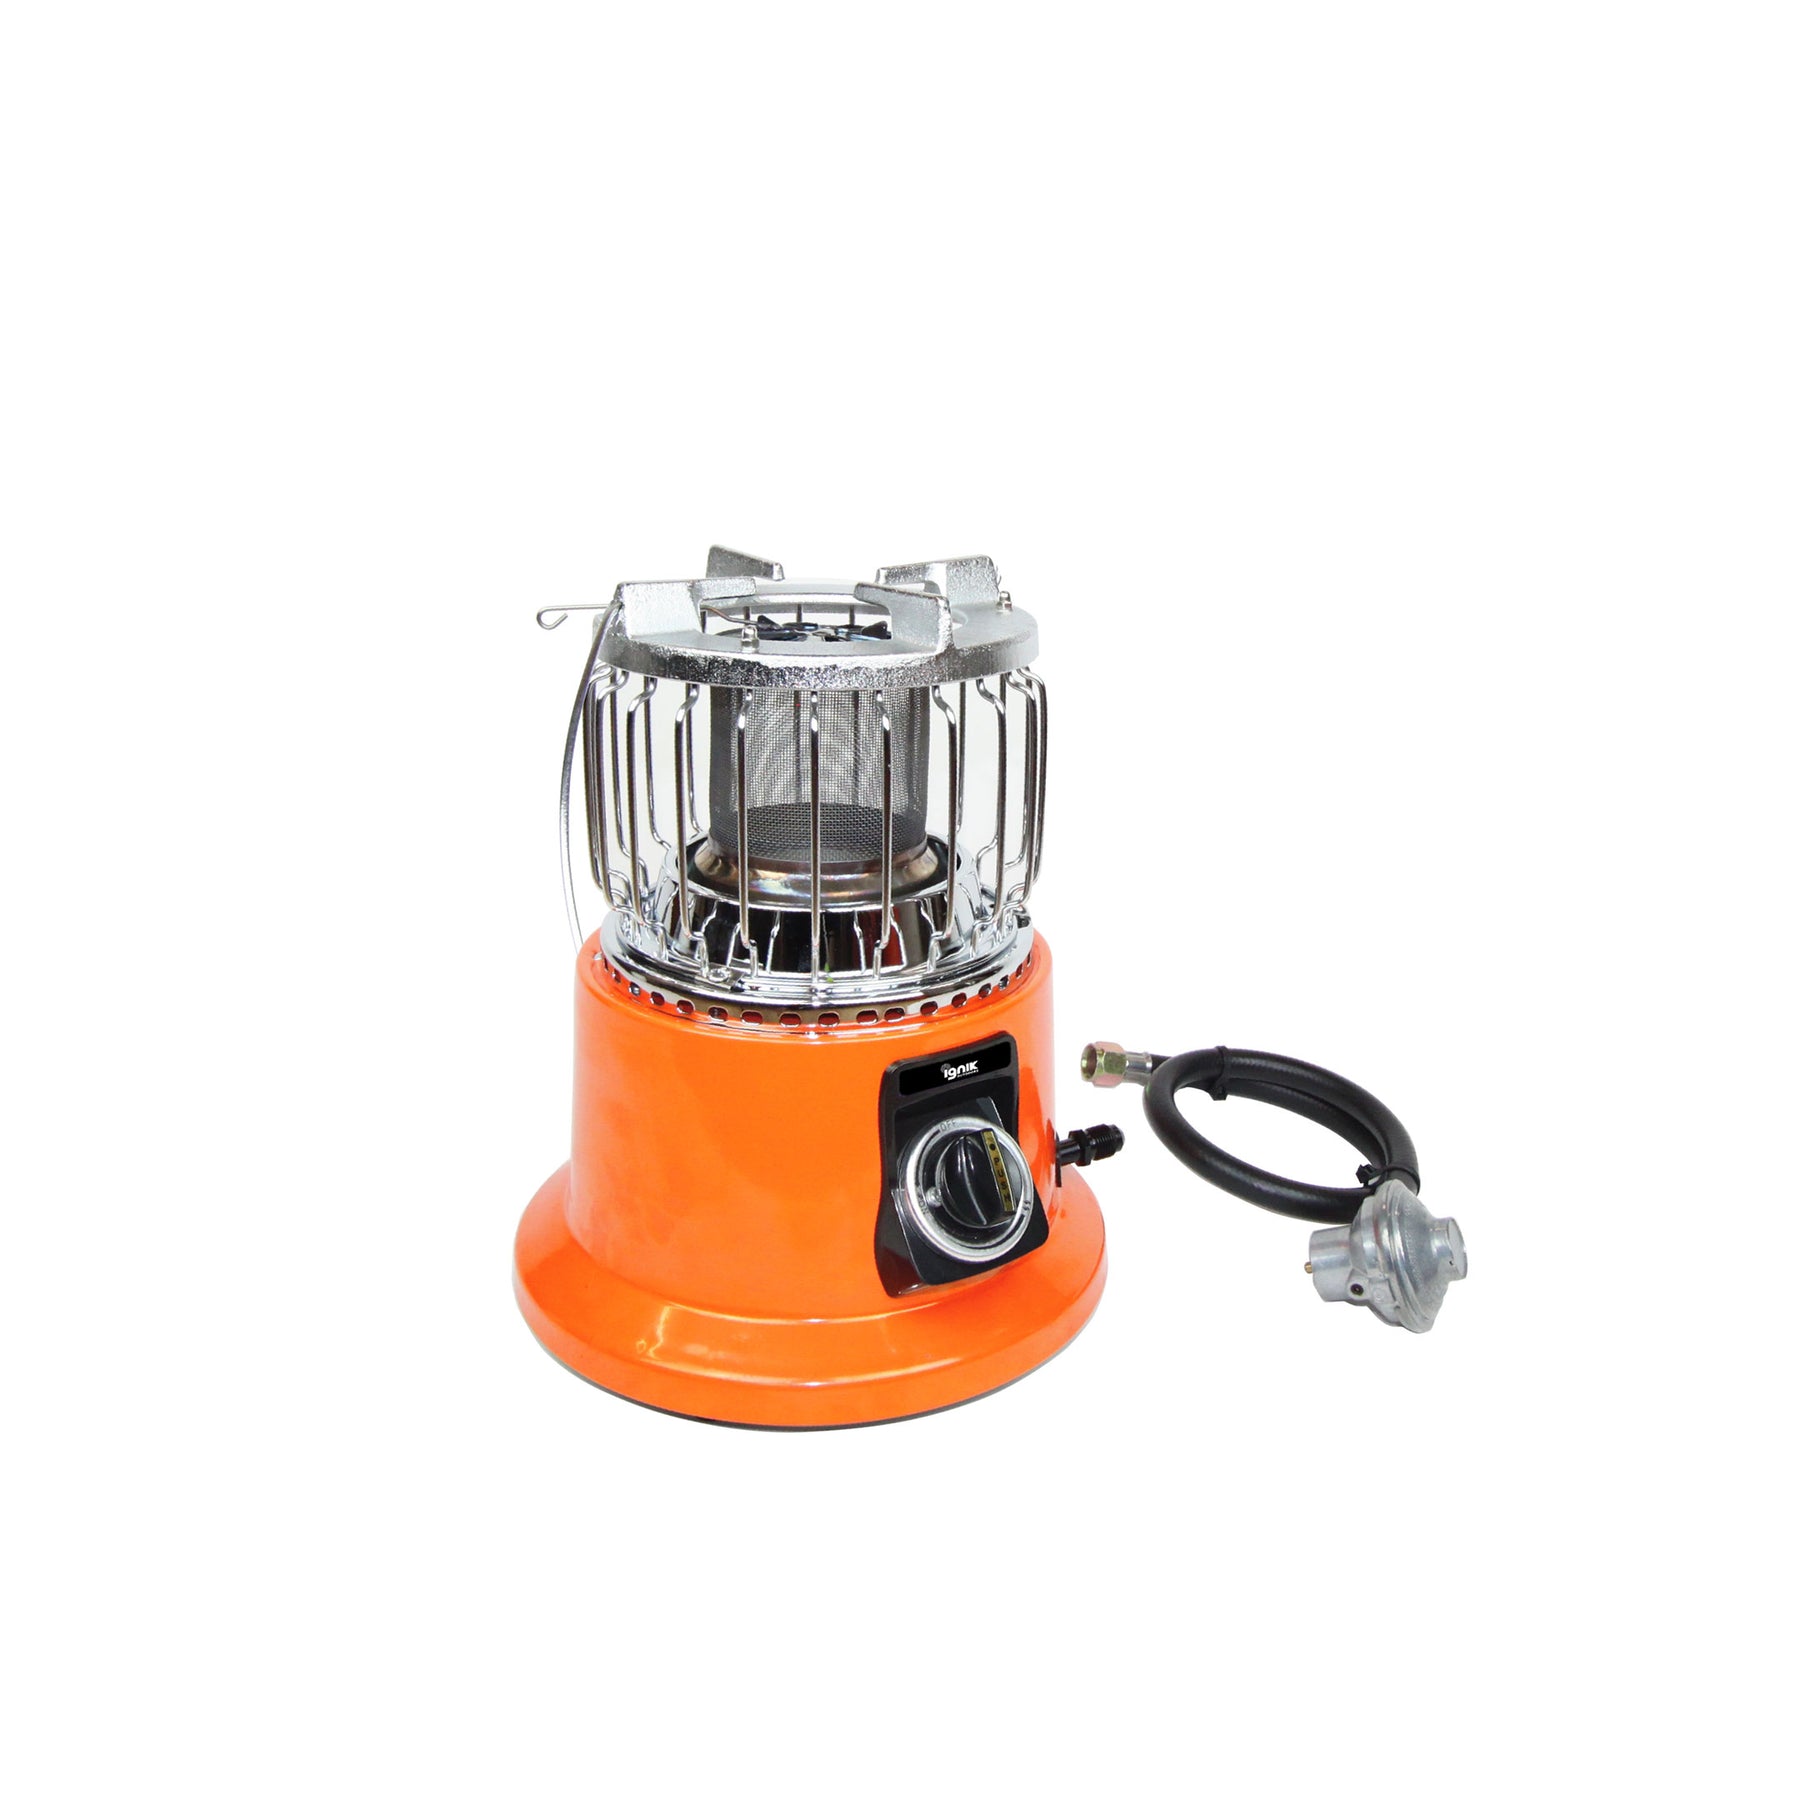 Symmetrie rots dictator 2-in-1 Heater-Stove – Ignik Outdoors